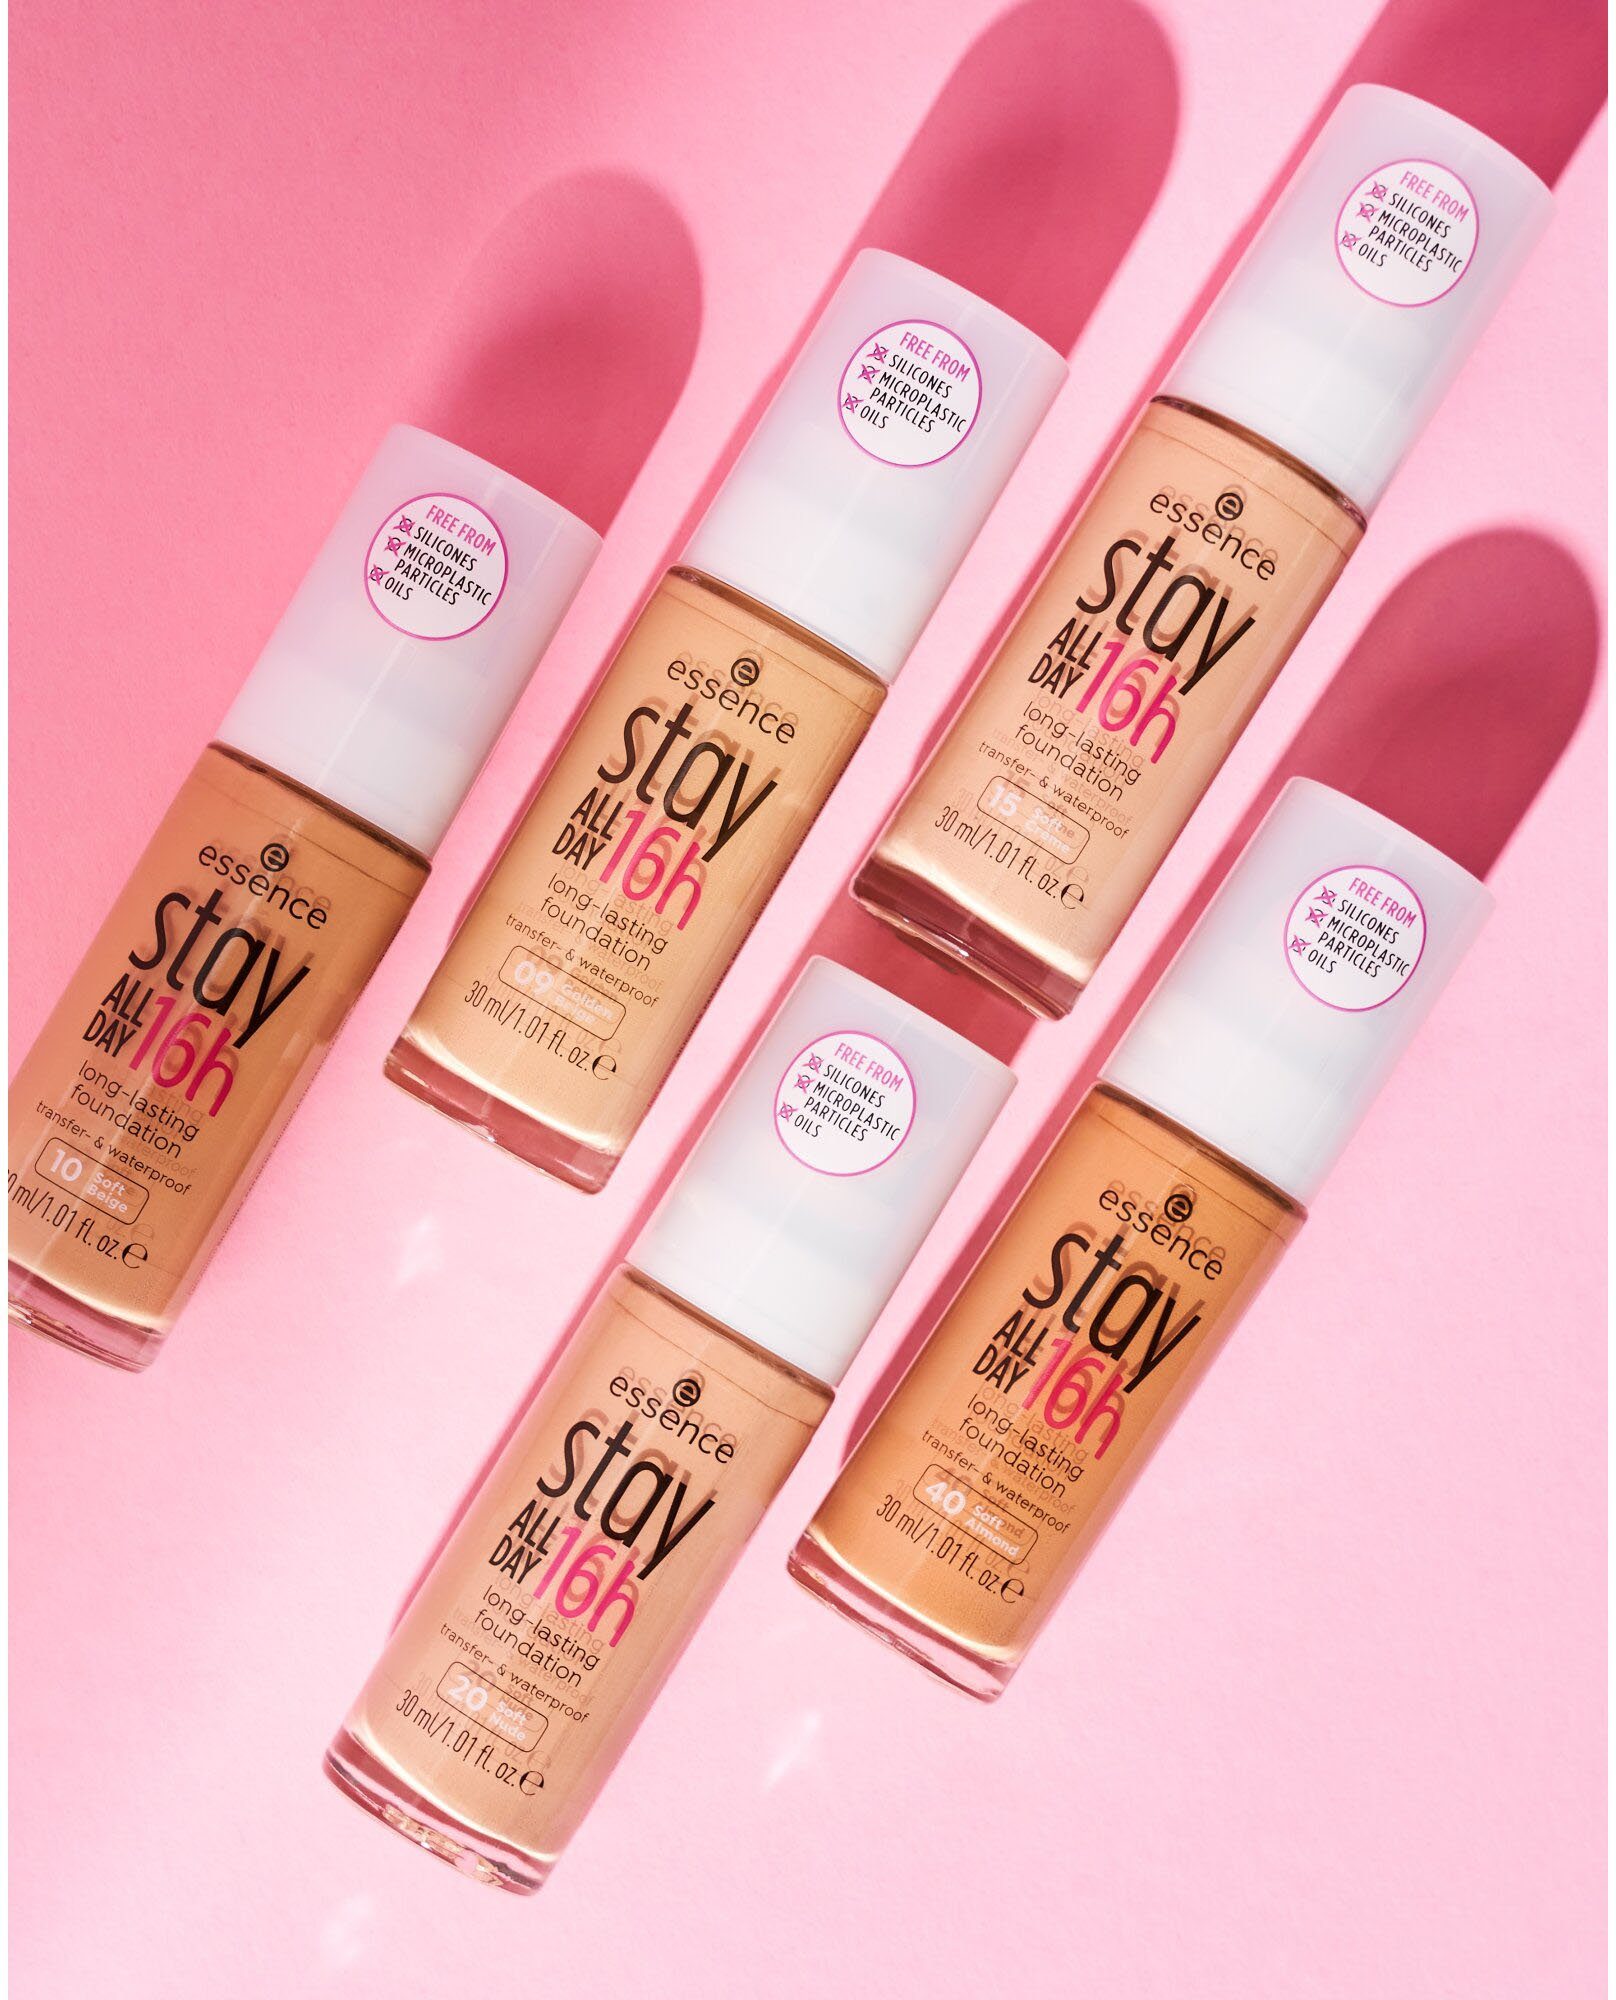 Soft ALL 3-tlg. stay 16h Essence Foundation DAY Creme long-lasting,